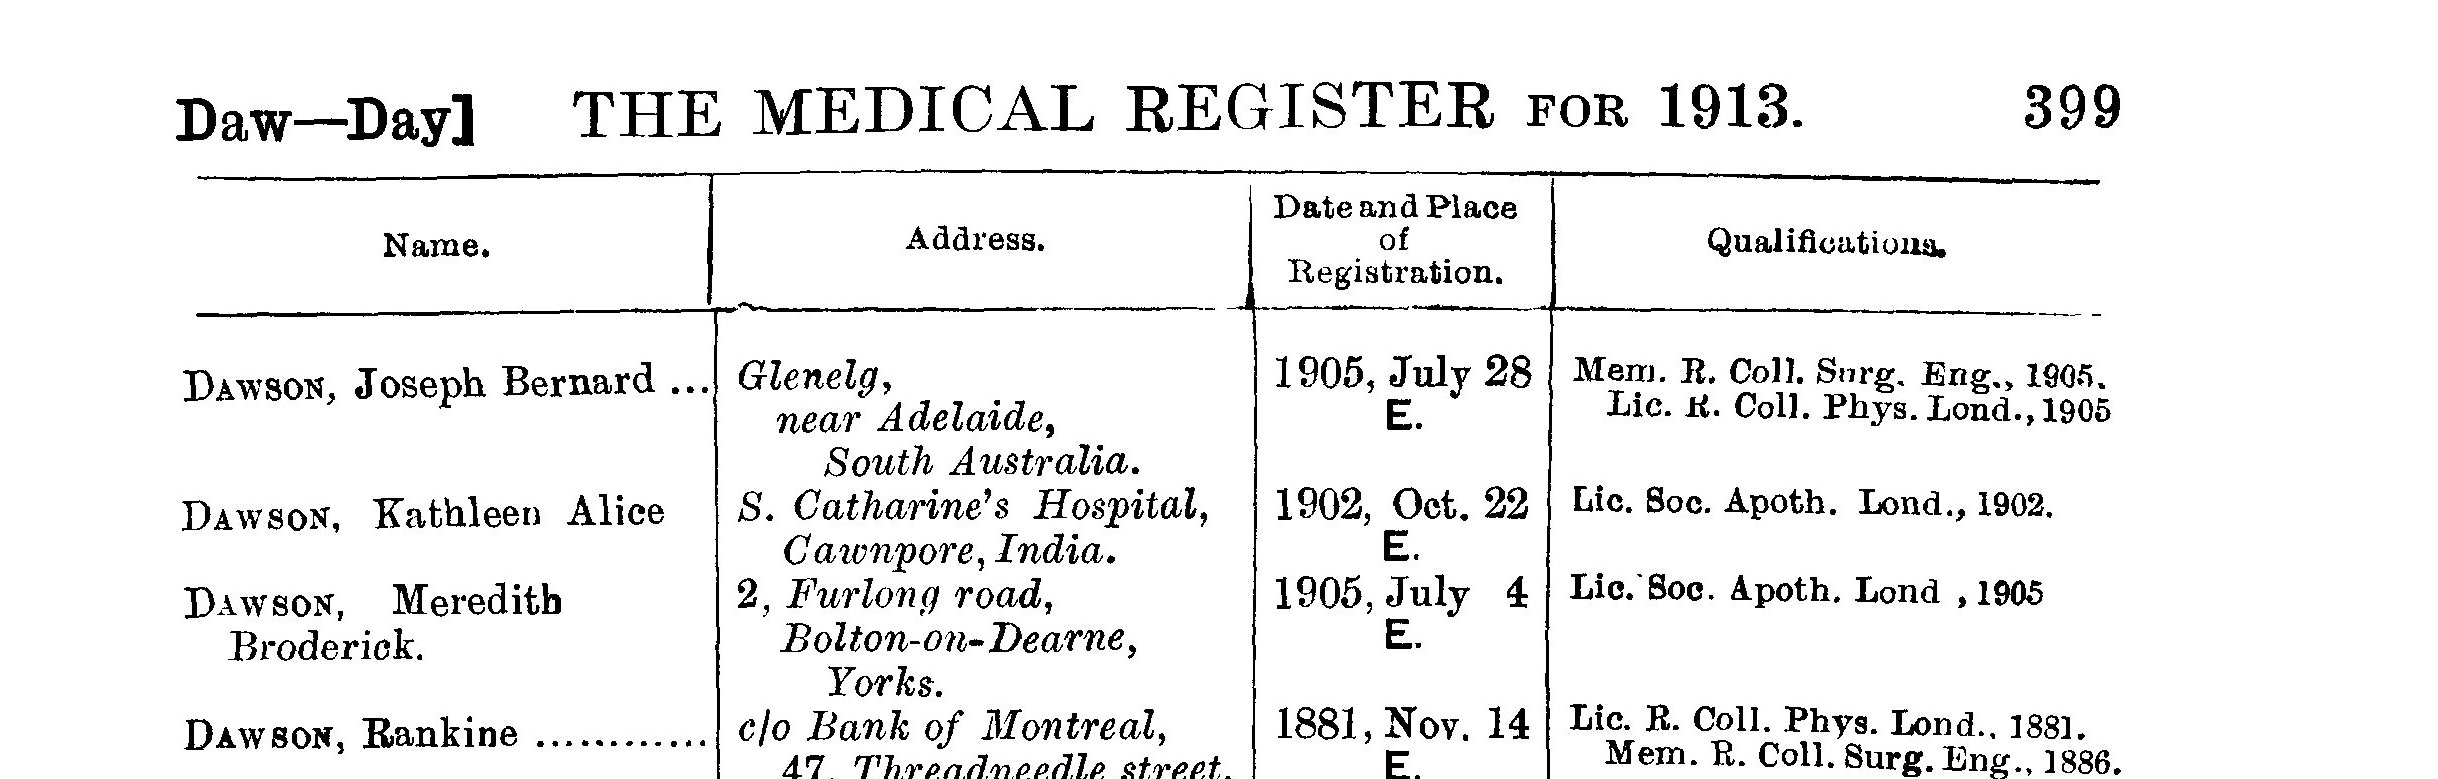 Meredith Broderick Dawson on the Medical Register for 1913 showing he was registered in October 22nd 1902 with the Lic. Soc. Apoth., London